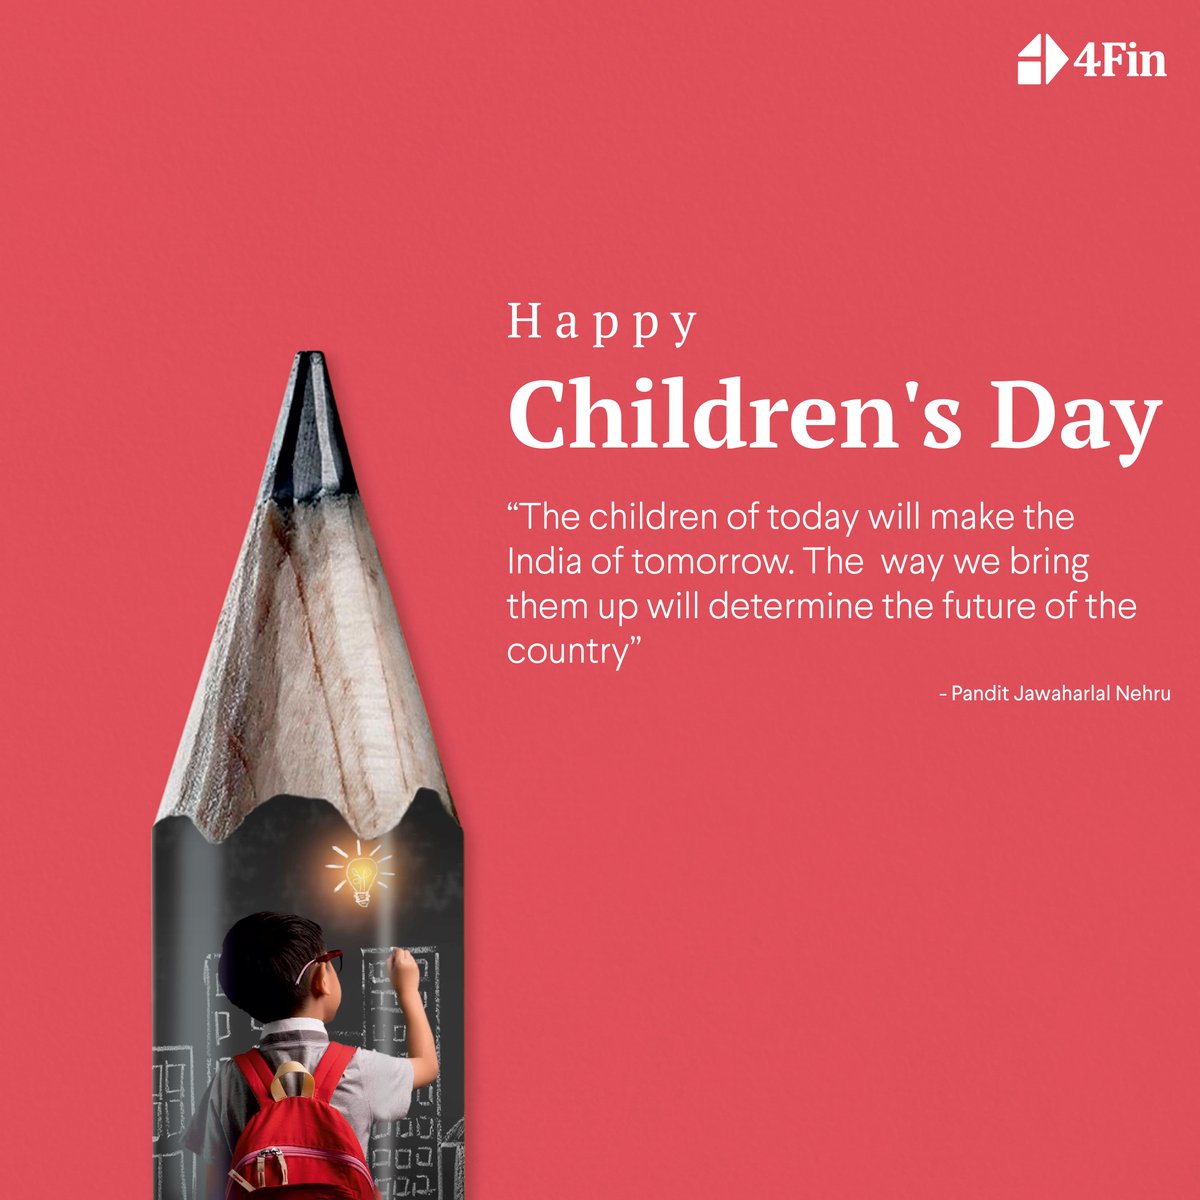 This Children's Day, let us give wings to their curiosities and dreams!
.
.
#childrensday #childrensday2022 #fintech #financialeducation #smartbharat #startup #indianeconomy #4Fin #CreditLine #finance #MSMEs #businessgoals #fundingyourfuture